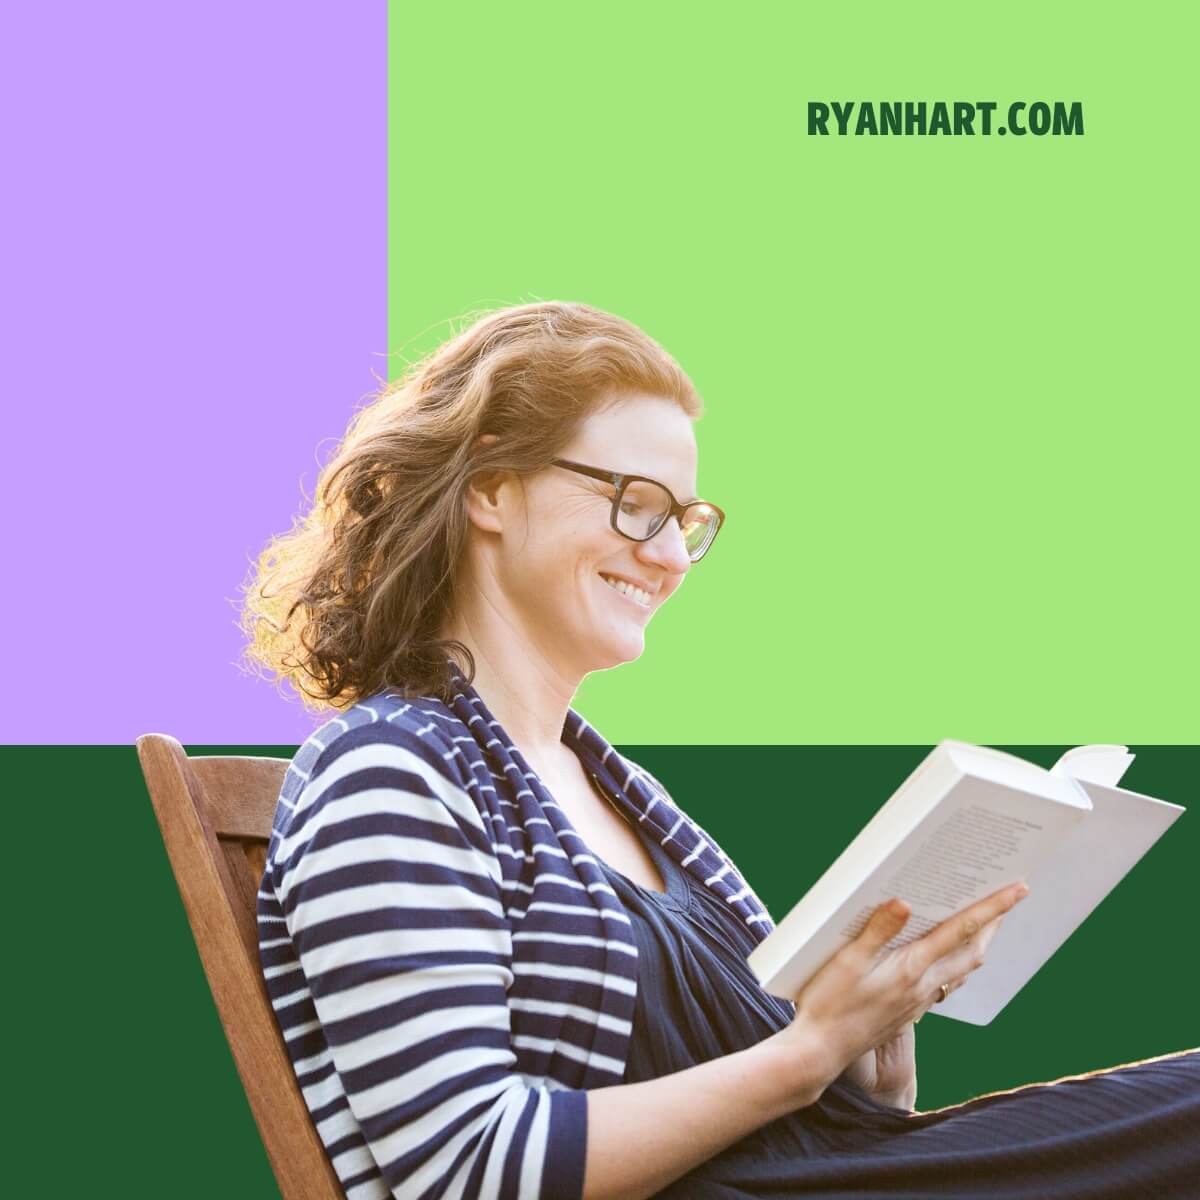 Smiling woman reading book